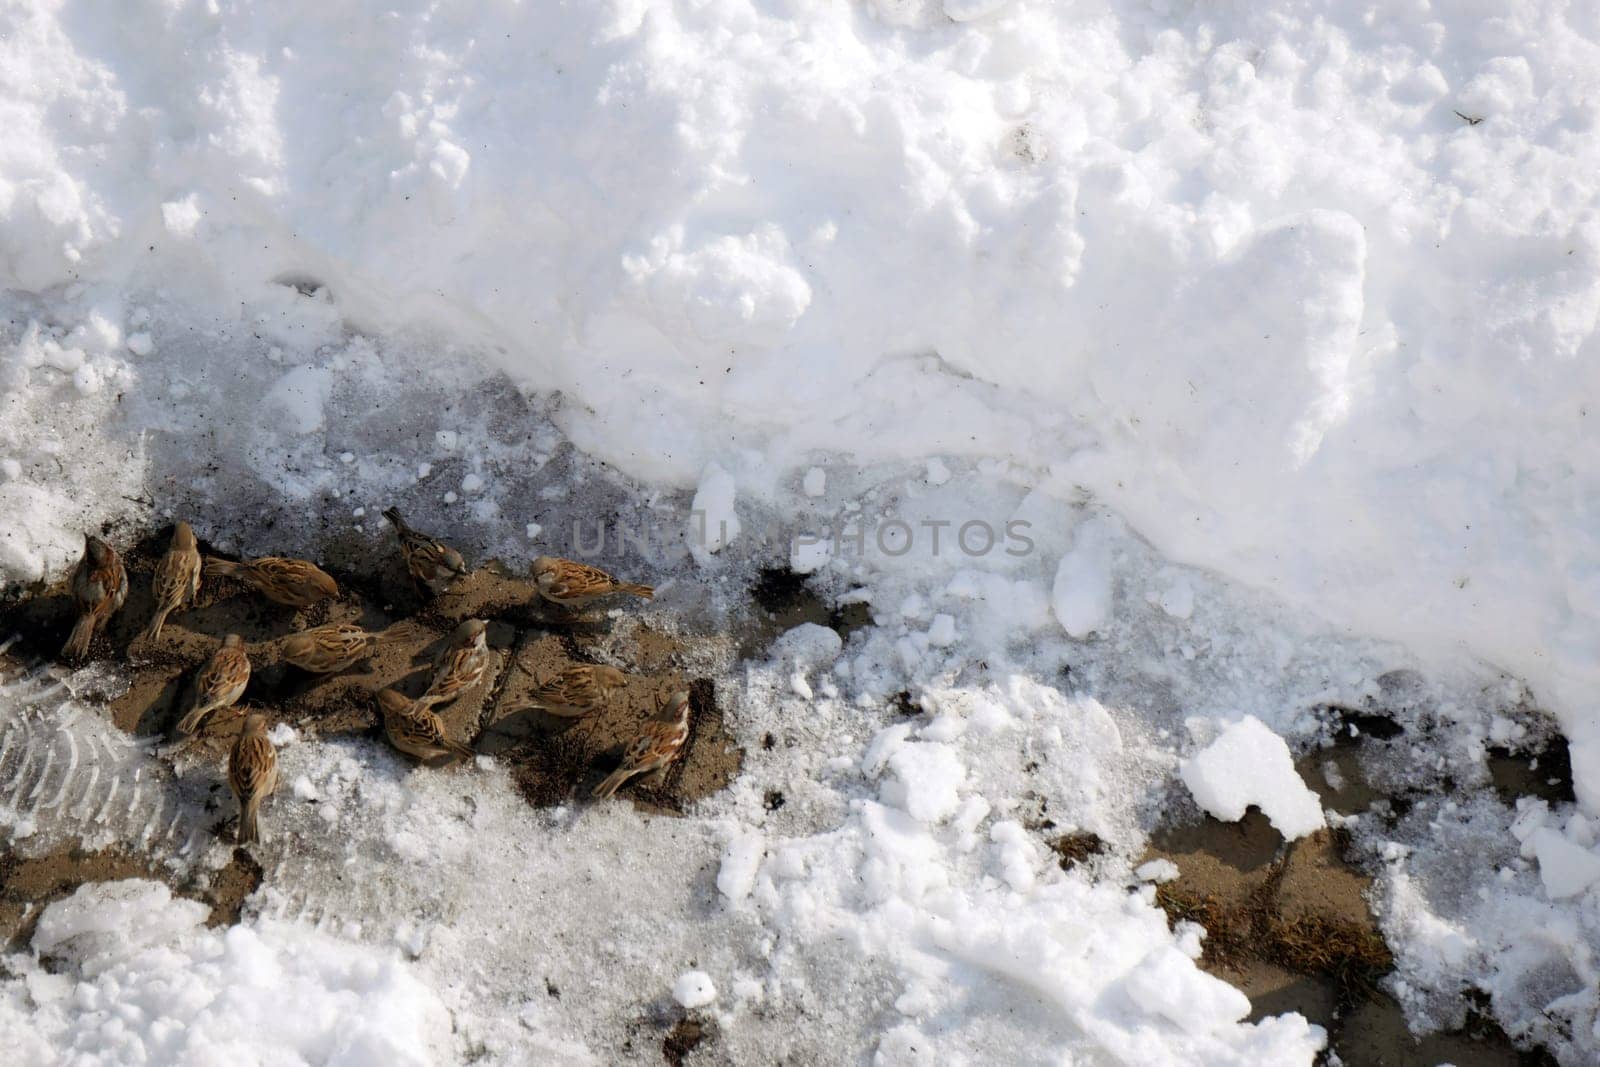 Sparrows, winter bears and sparrows looking for food in the snow in winter, by nhatipoglu